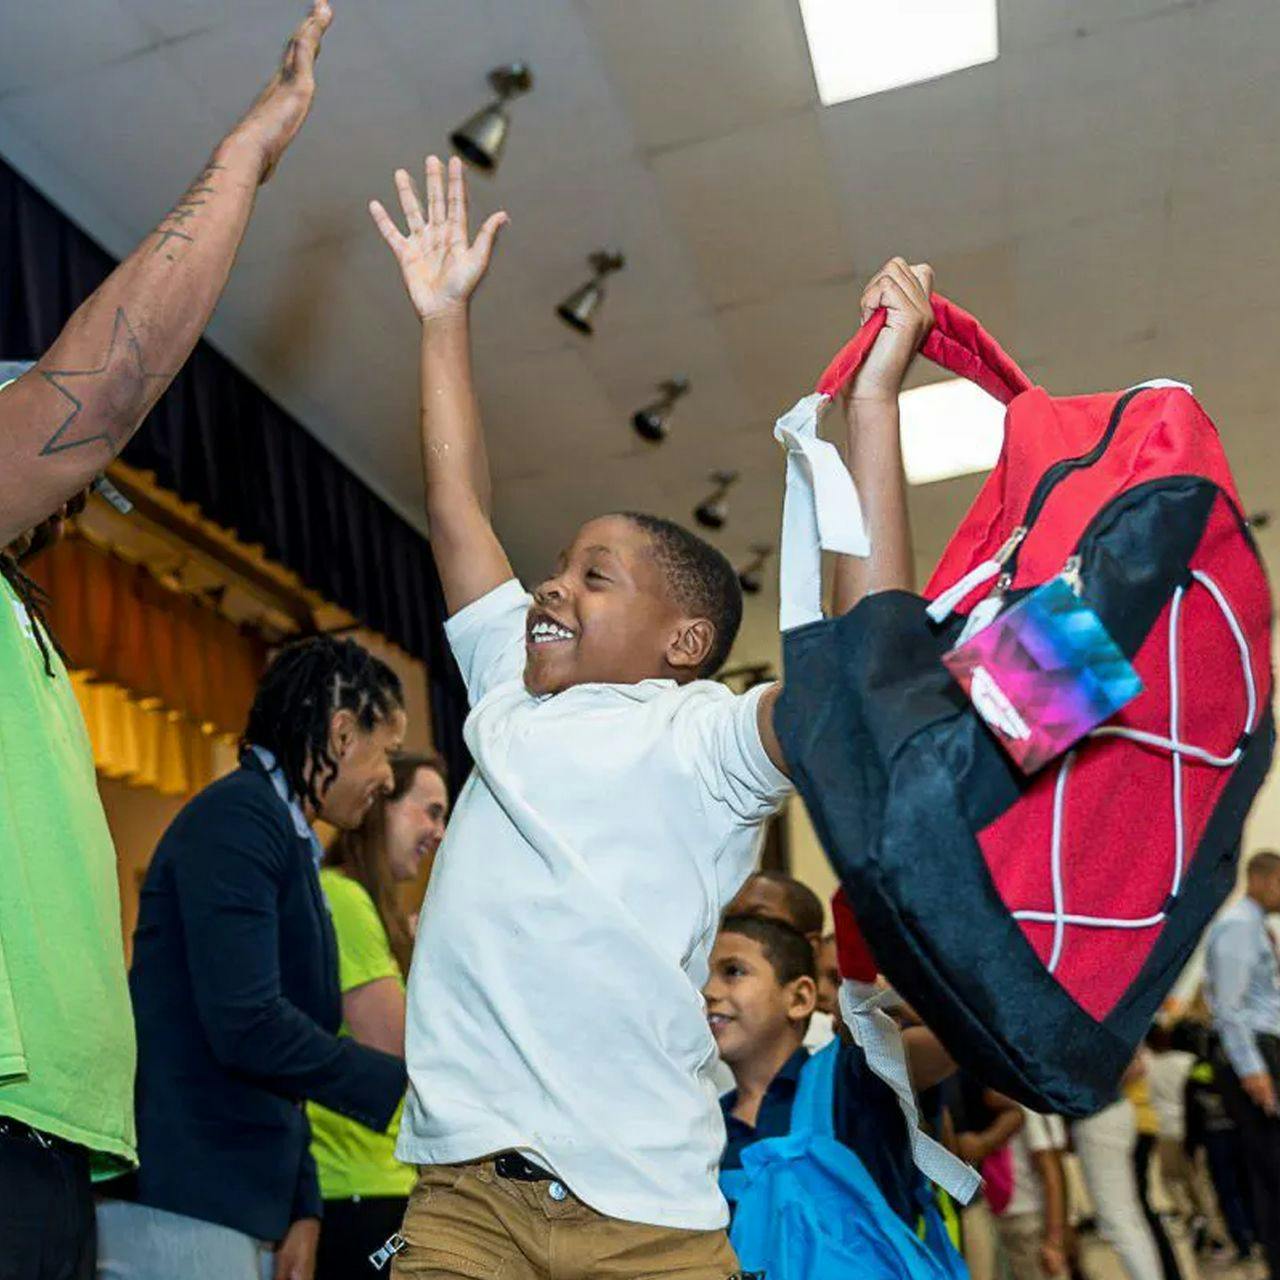 Help students reach their full potential by providing school supplies.